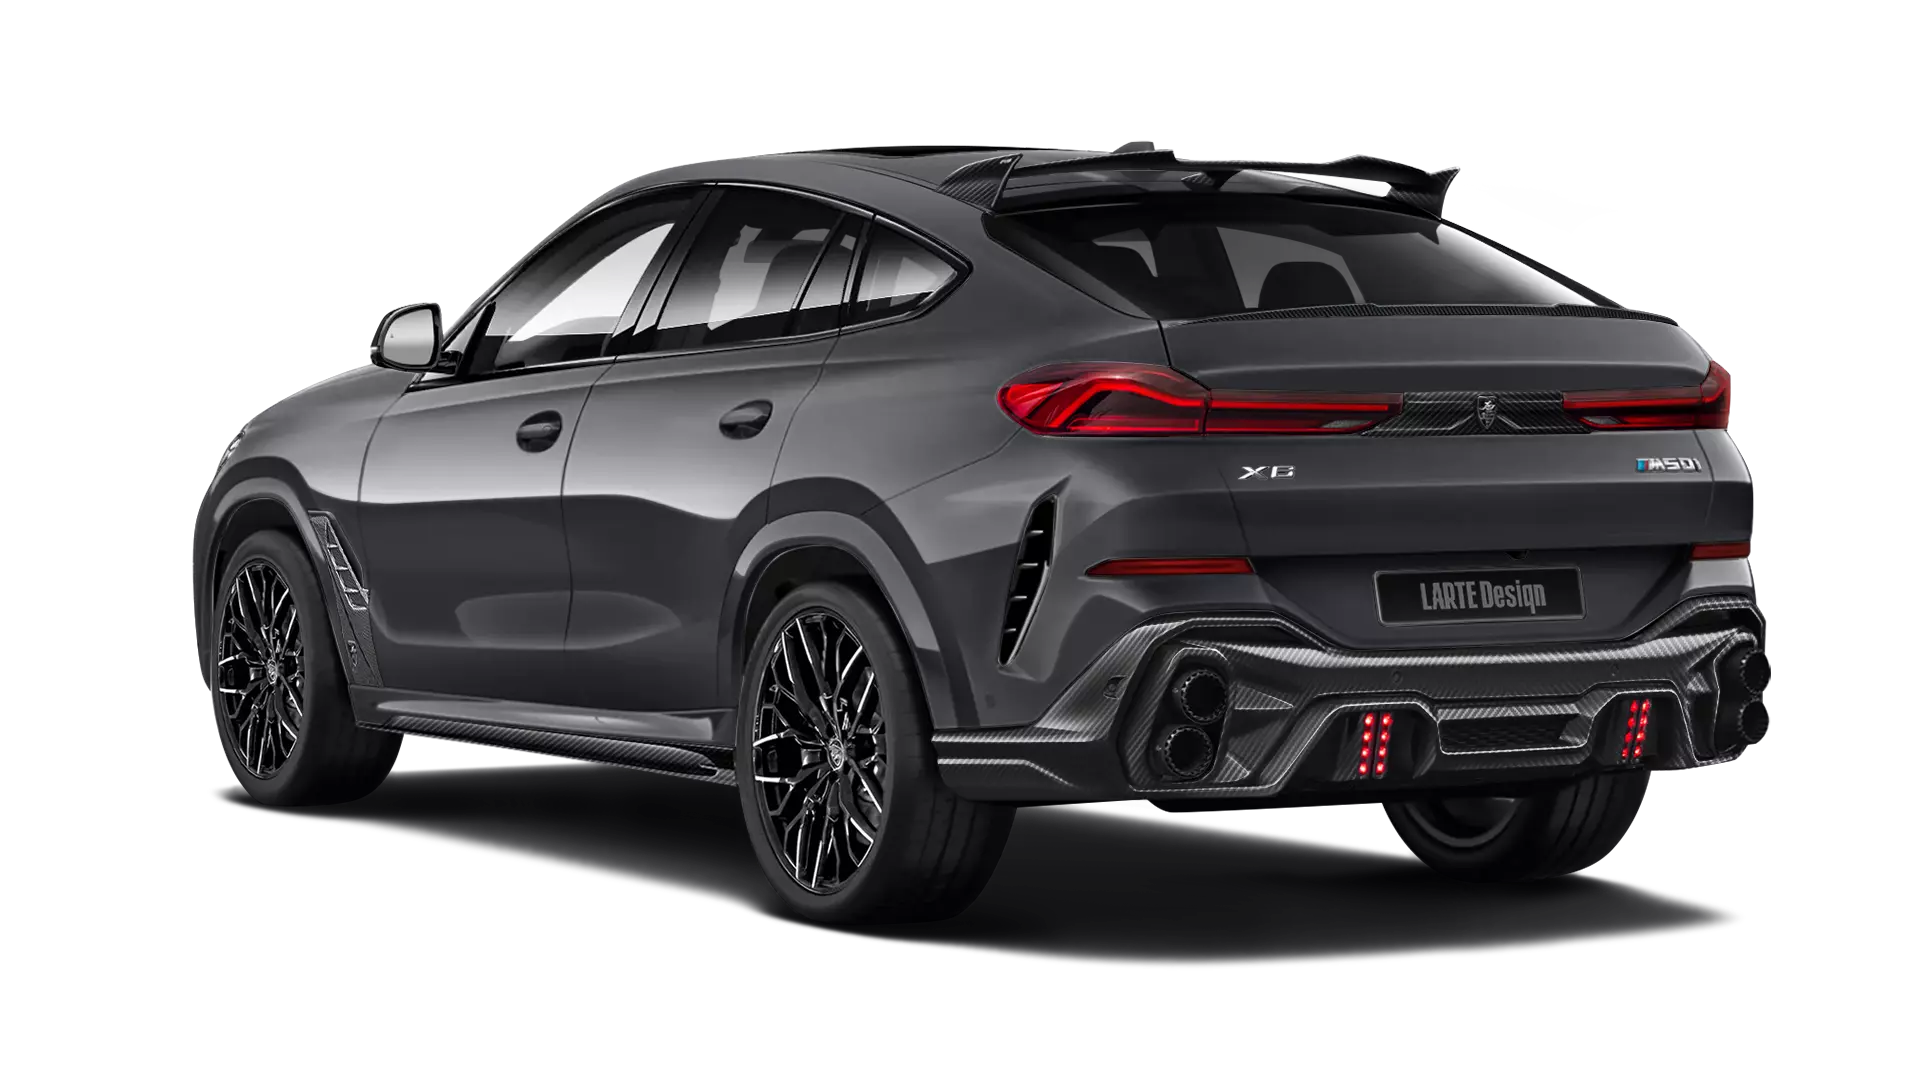 BMW X6 with carbon body kit: rear view shown in arctic grey